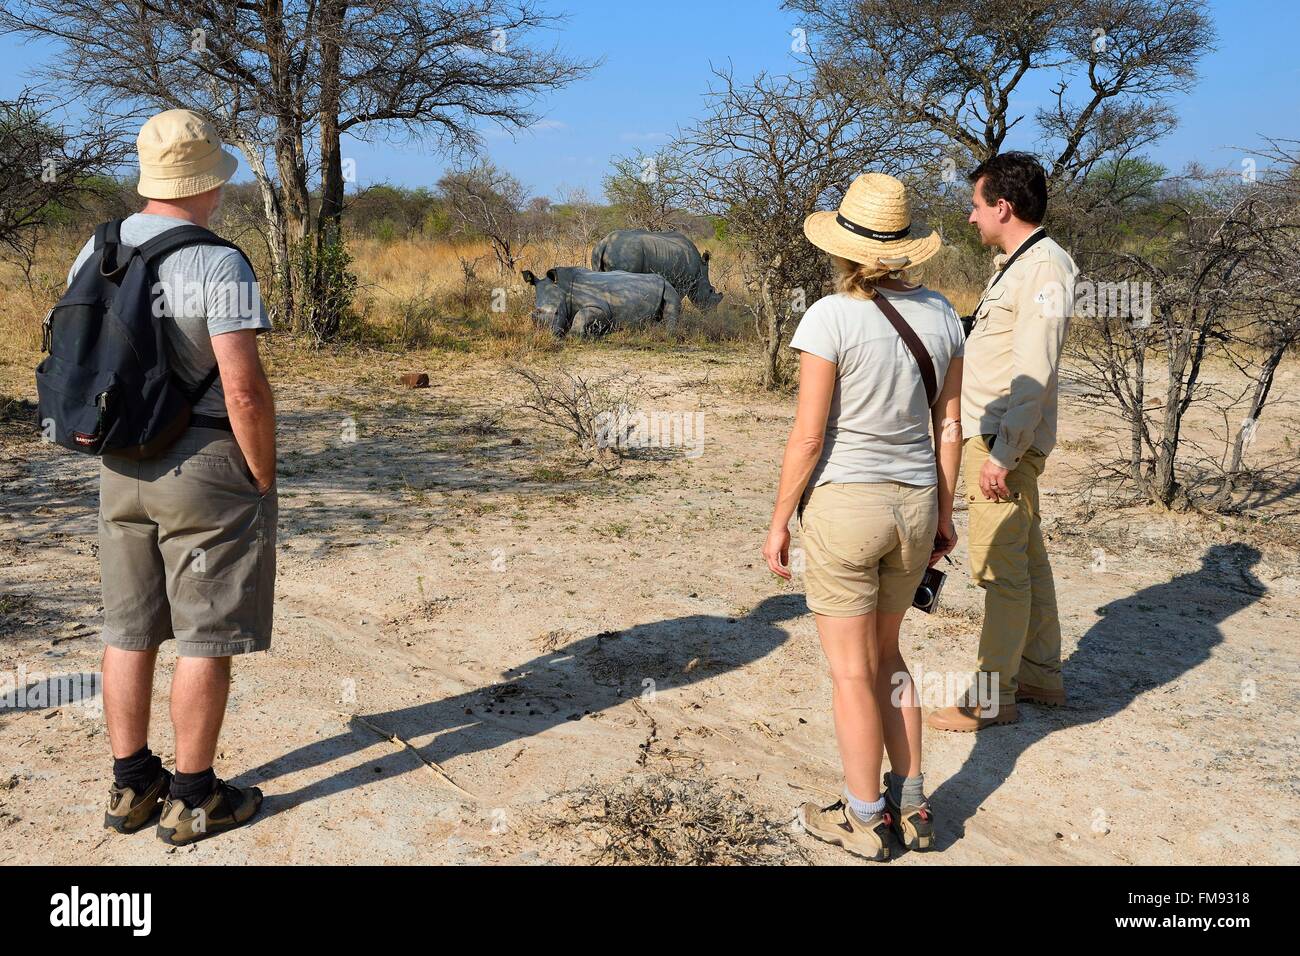 Zimbabwe, Matabeleland South Province, Matobo or Matopos Hills National Park, listed as World Heritage by UNESCO, walking safari in search of White Rhinoceros (Ceratotherium simum) Stock Photo